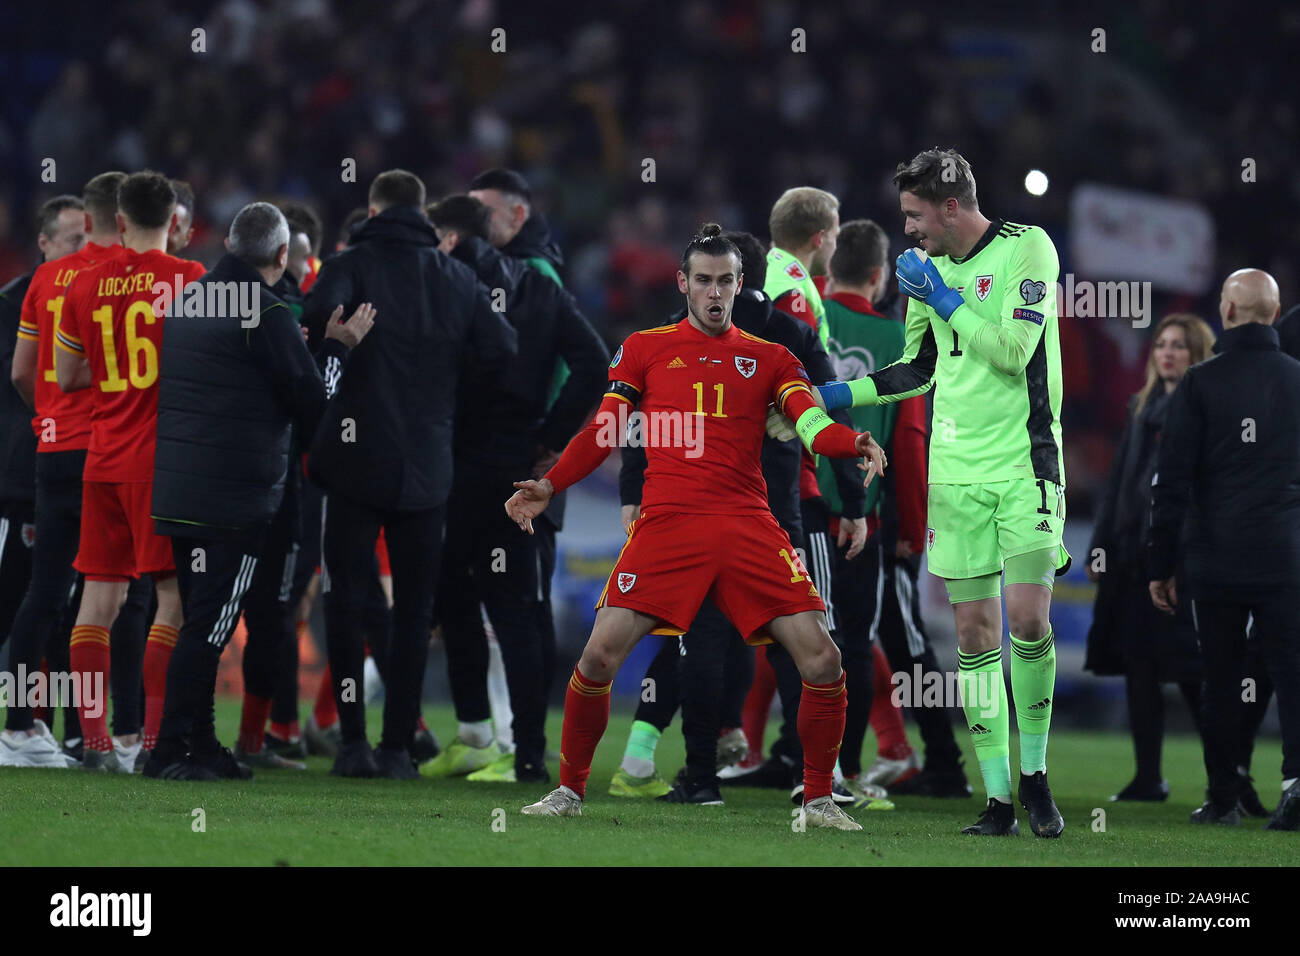 Gareth Bale of Wales (11) shows off some dance moves to Wales goalkeeper Wayne Hennessey as they celebrate their qualification.UEFA Euro 2020 qualifier group E match, Wales v Hungary at the Cardiff city Stadium in Cardiff , South Wales on Tuesday 19th November 2019. pic by Andrew Orchard/Andrew Orchard sports photography/Alamy live News EDITORIAL USE ONLY Stock Photo